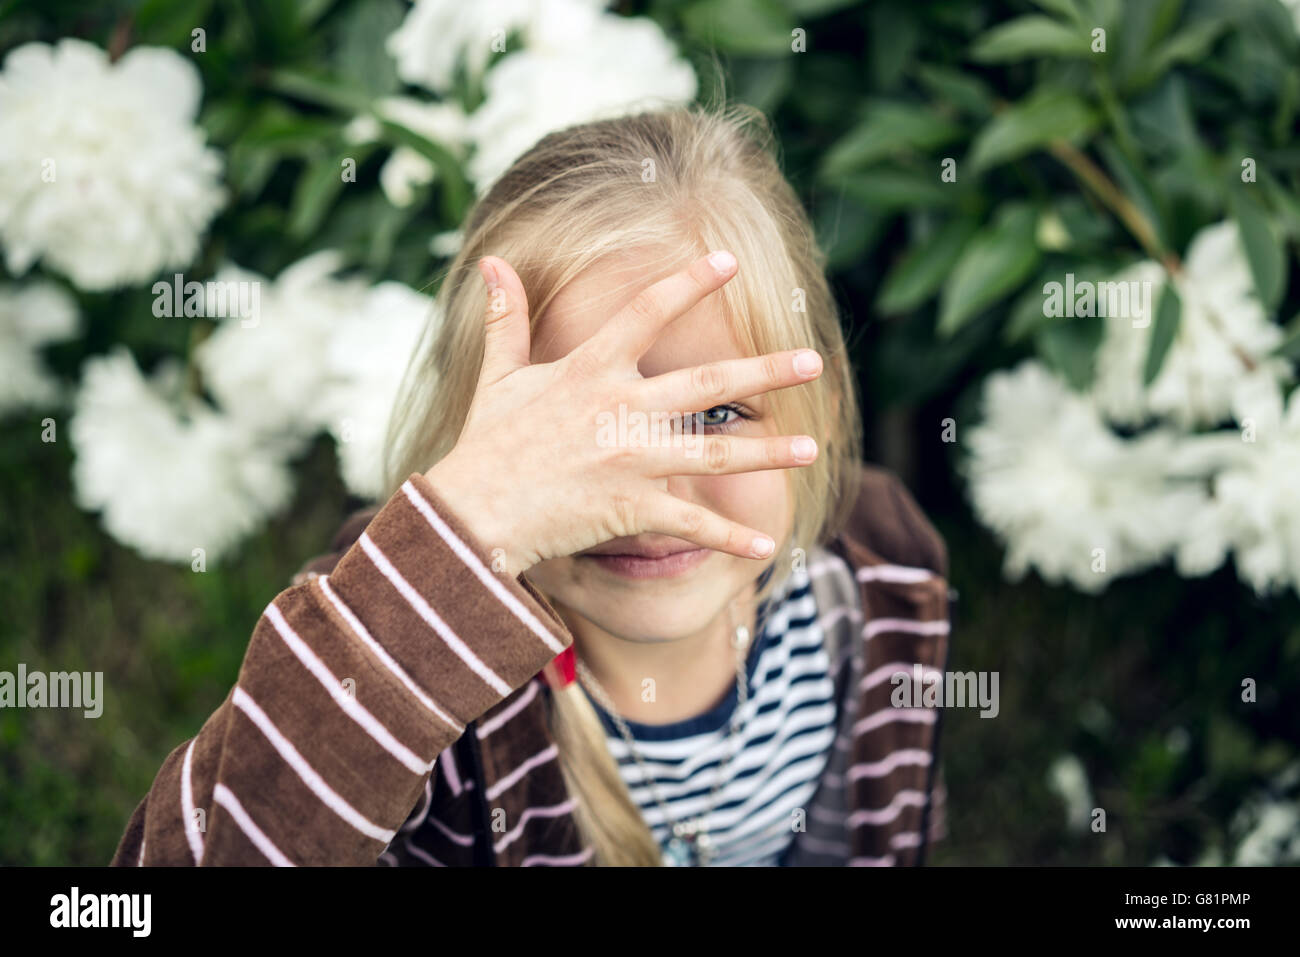 Beautiful blond girl hiding behind his hand. Stock Photo